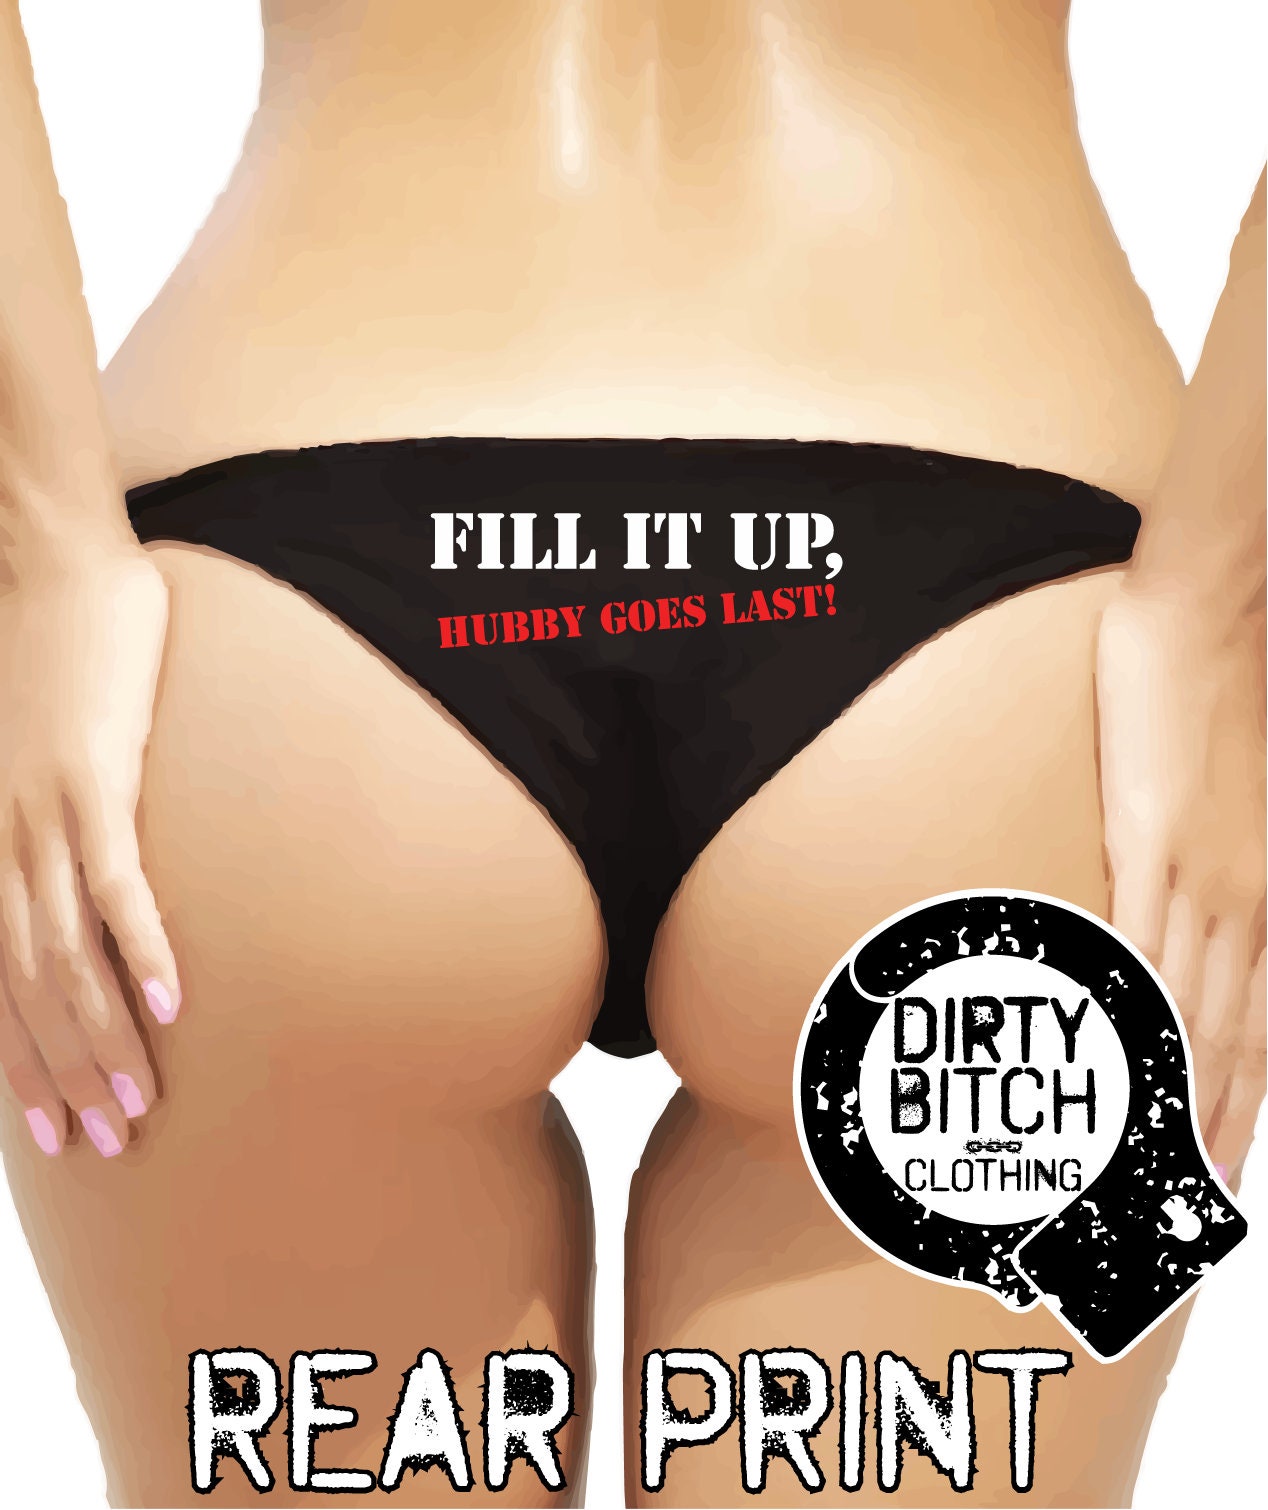 Fill It Up Hubby Goes Last rear Printadult